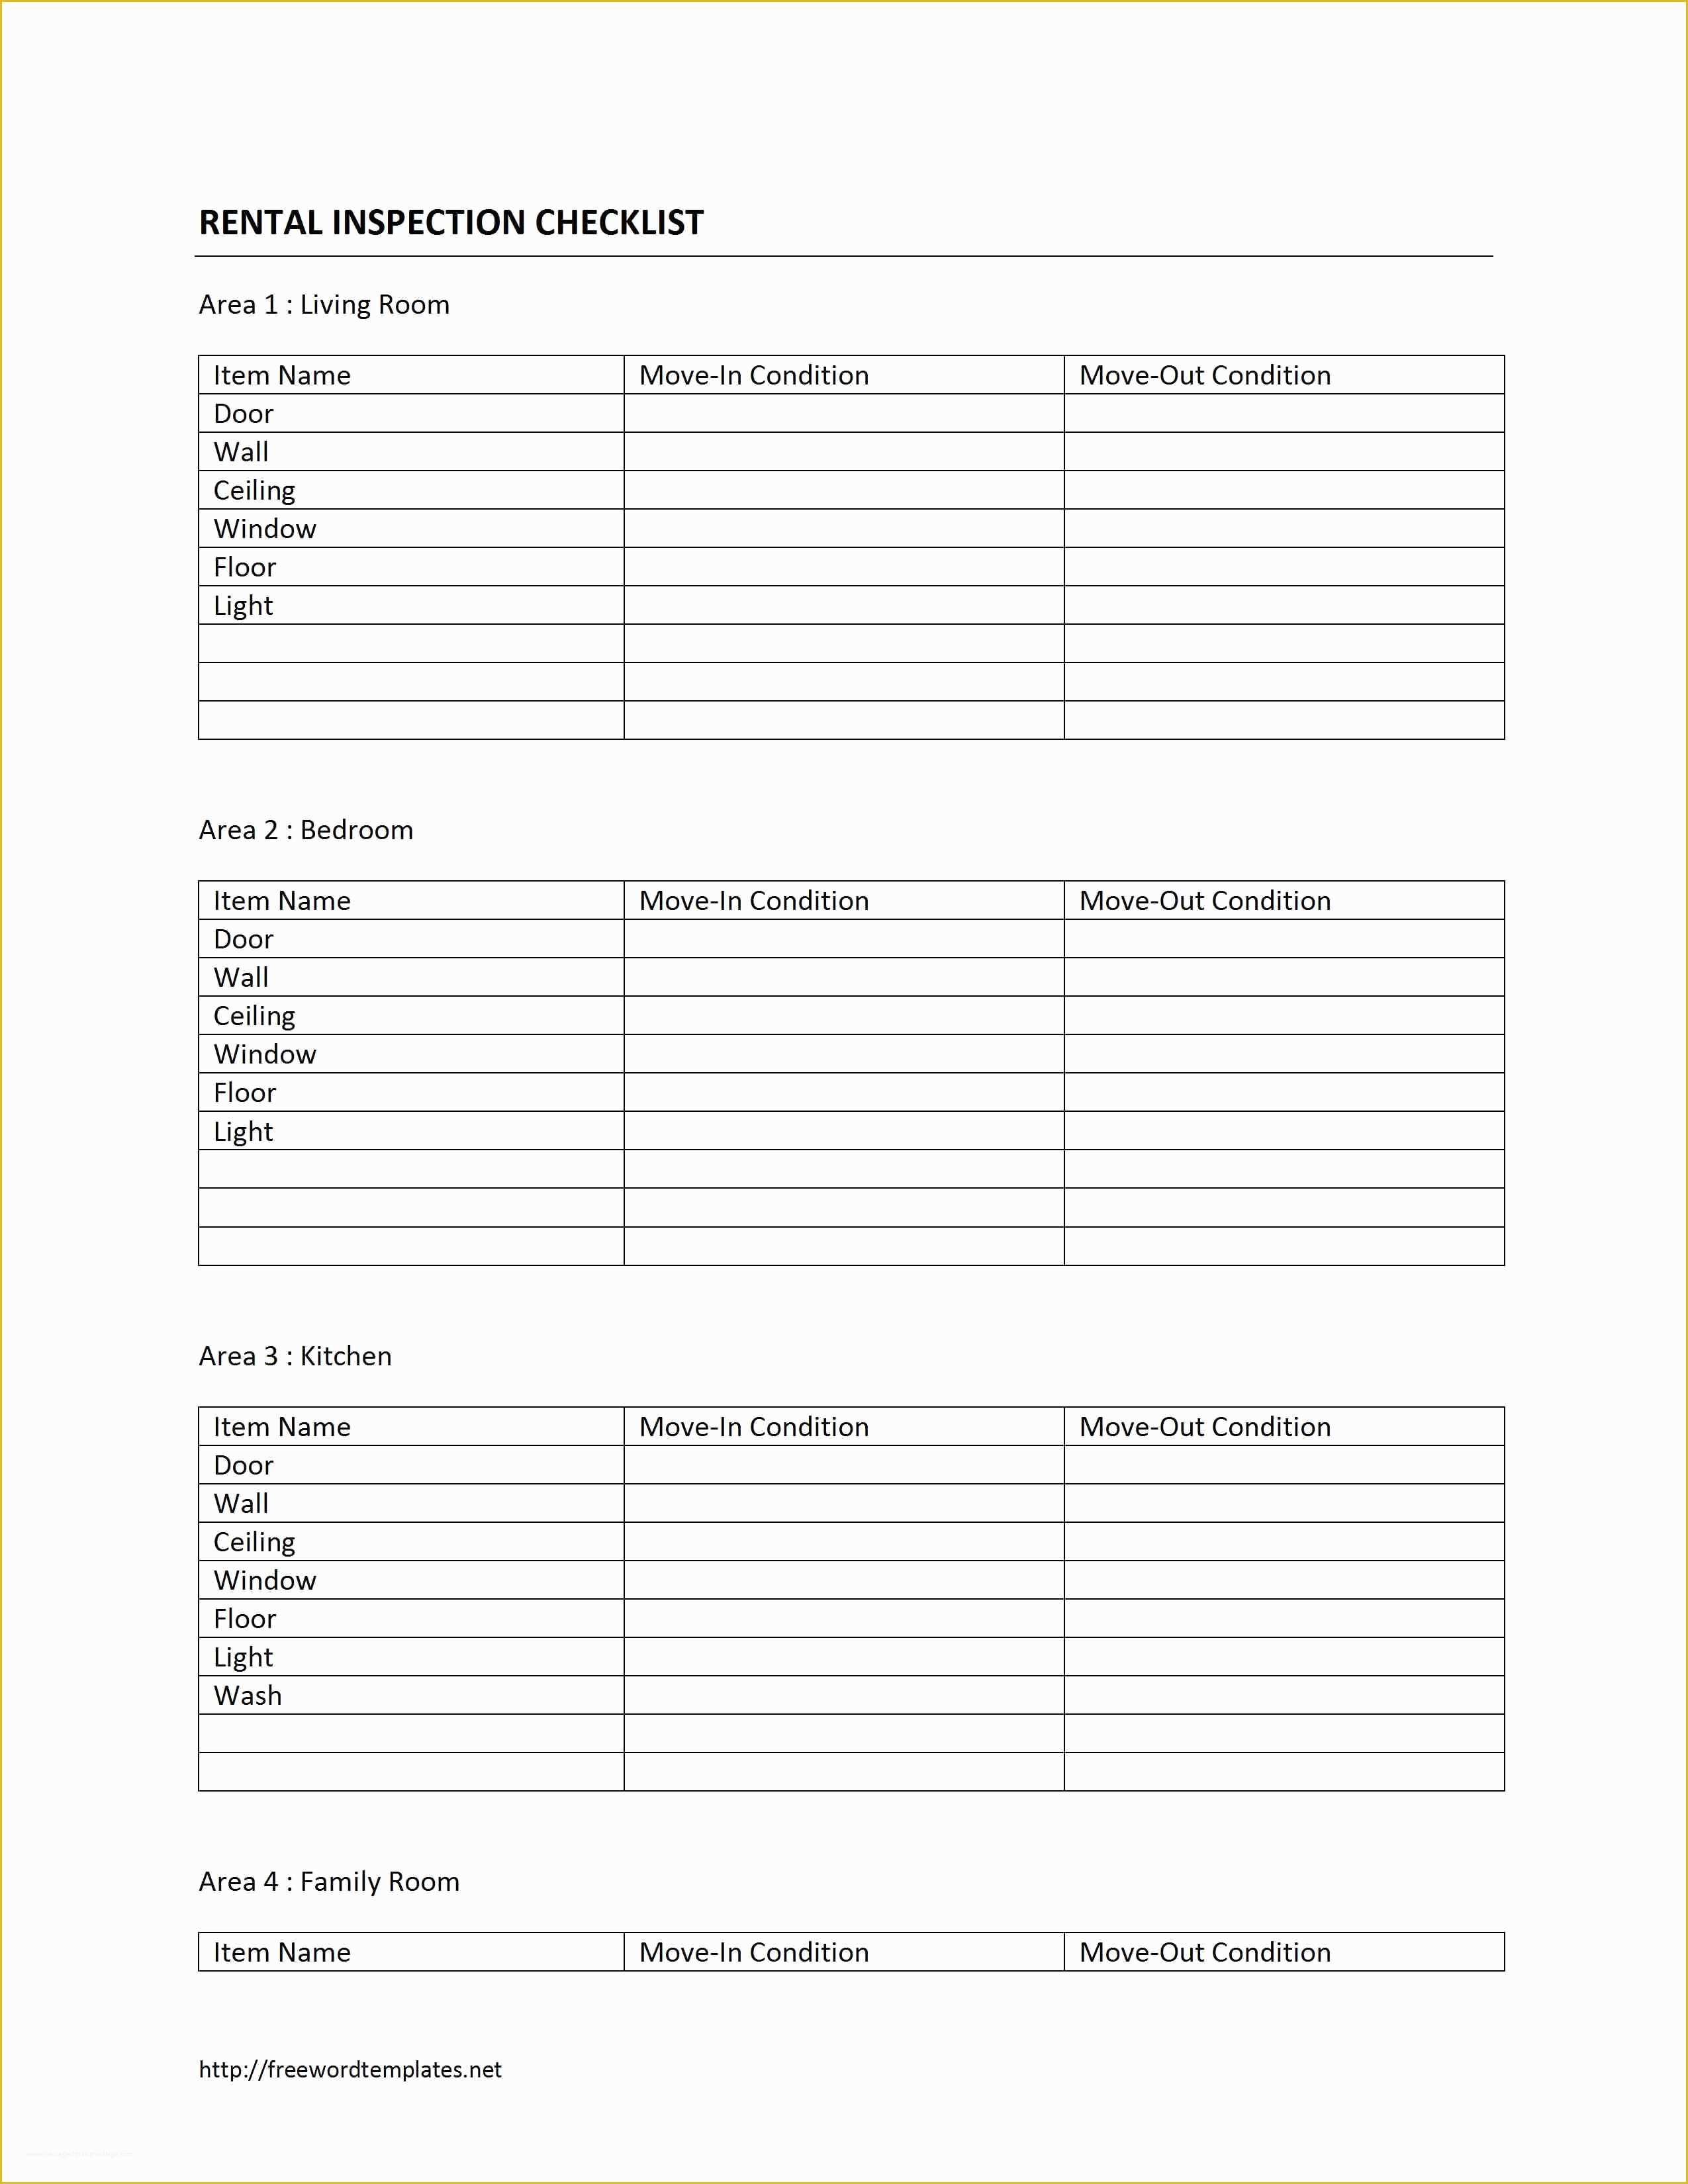 Free Property Inspection Checklist Templates Of Home Rental Inspection Checklist Template